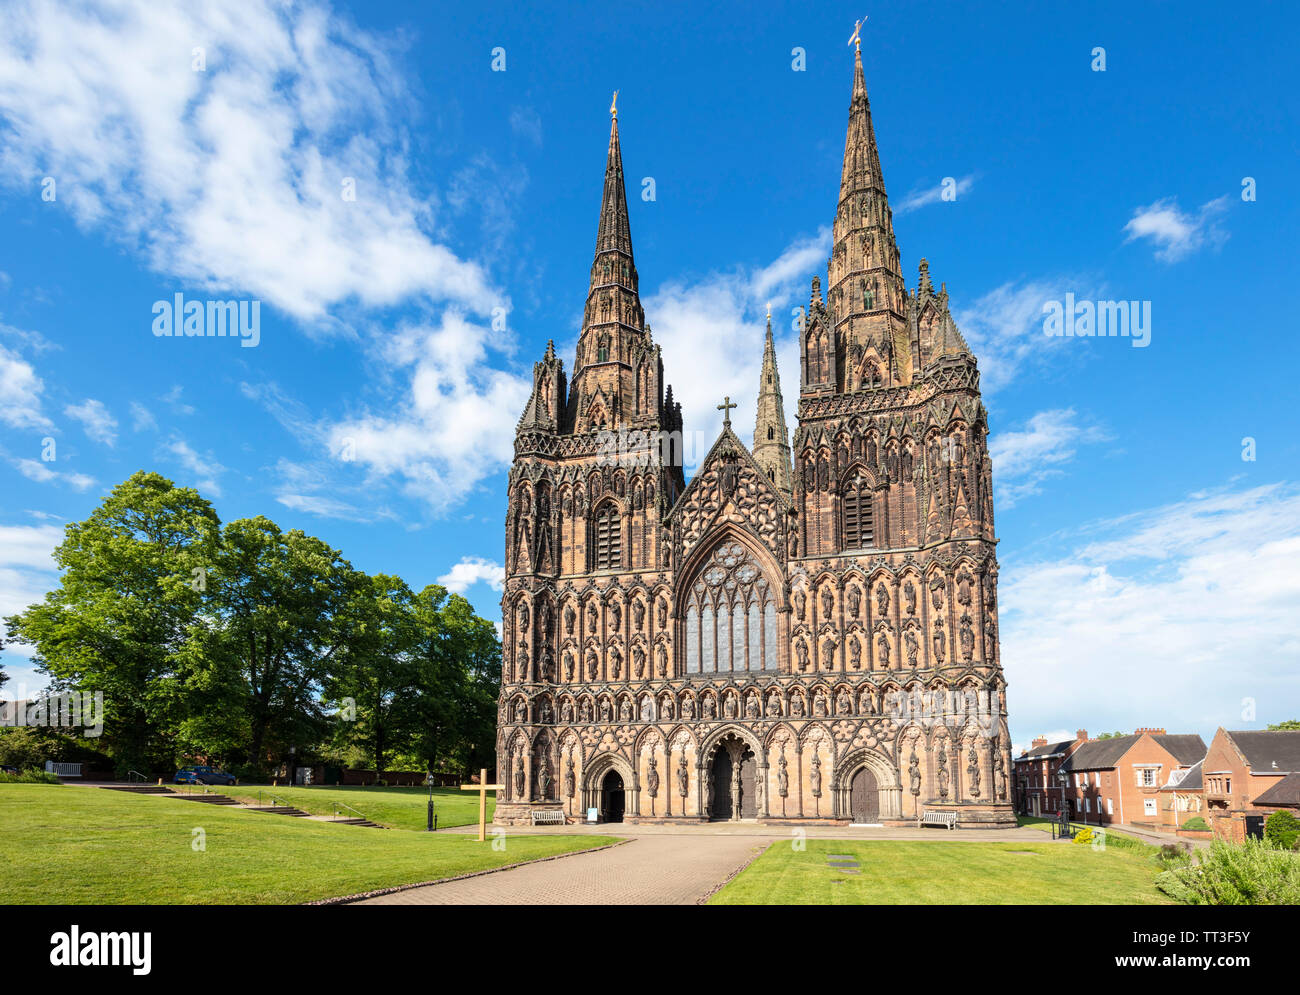 Lichfield cathedral Lichfield cathedral west front with carvings of St Chad saxon and norman kings Lichfield Staffordshire England UK GB Europe Stock Photo